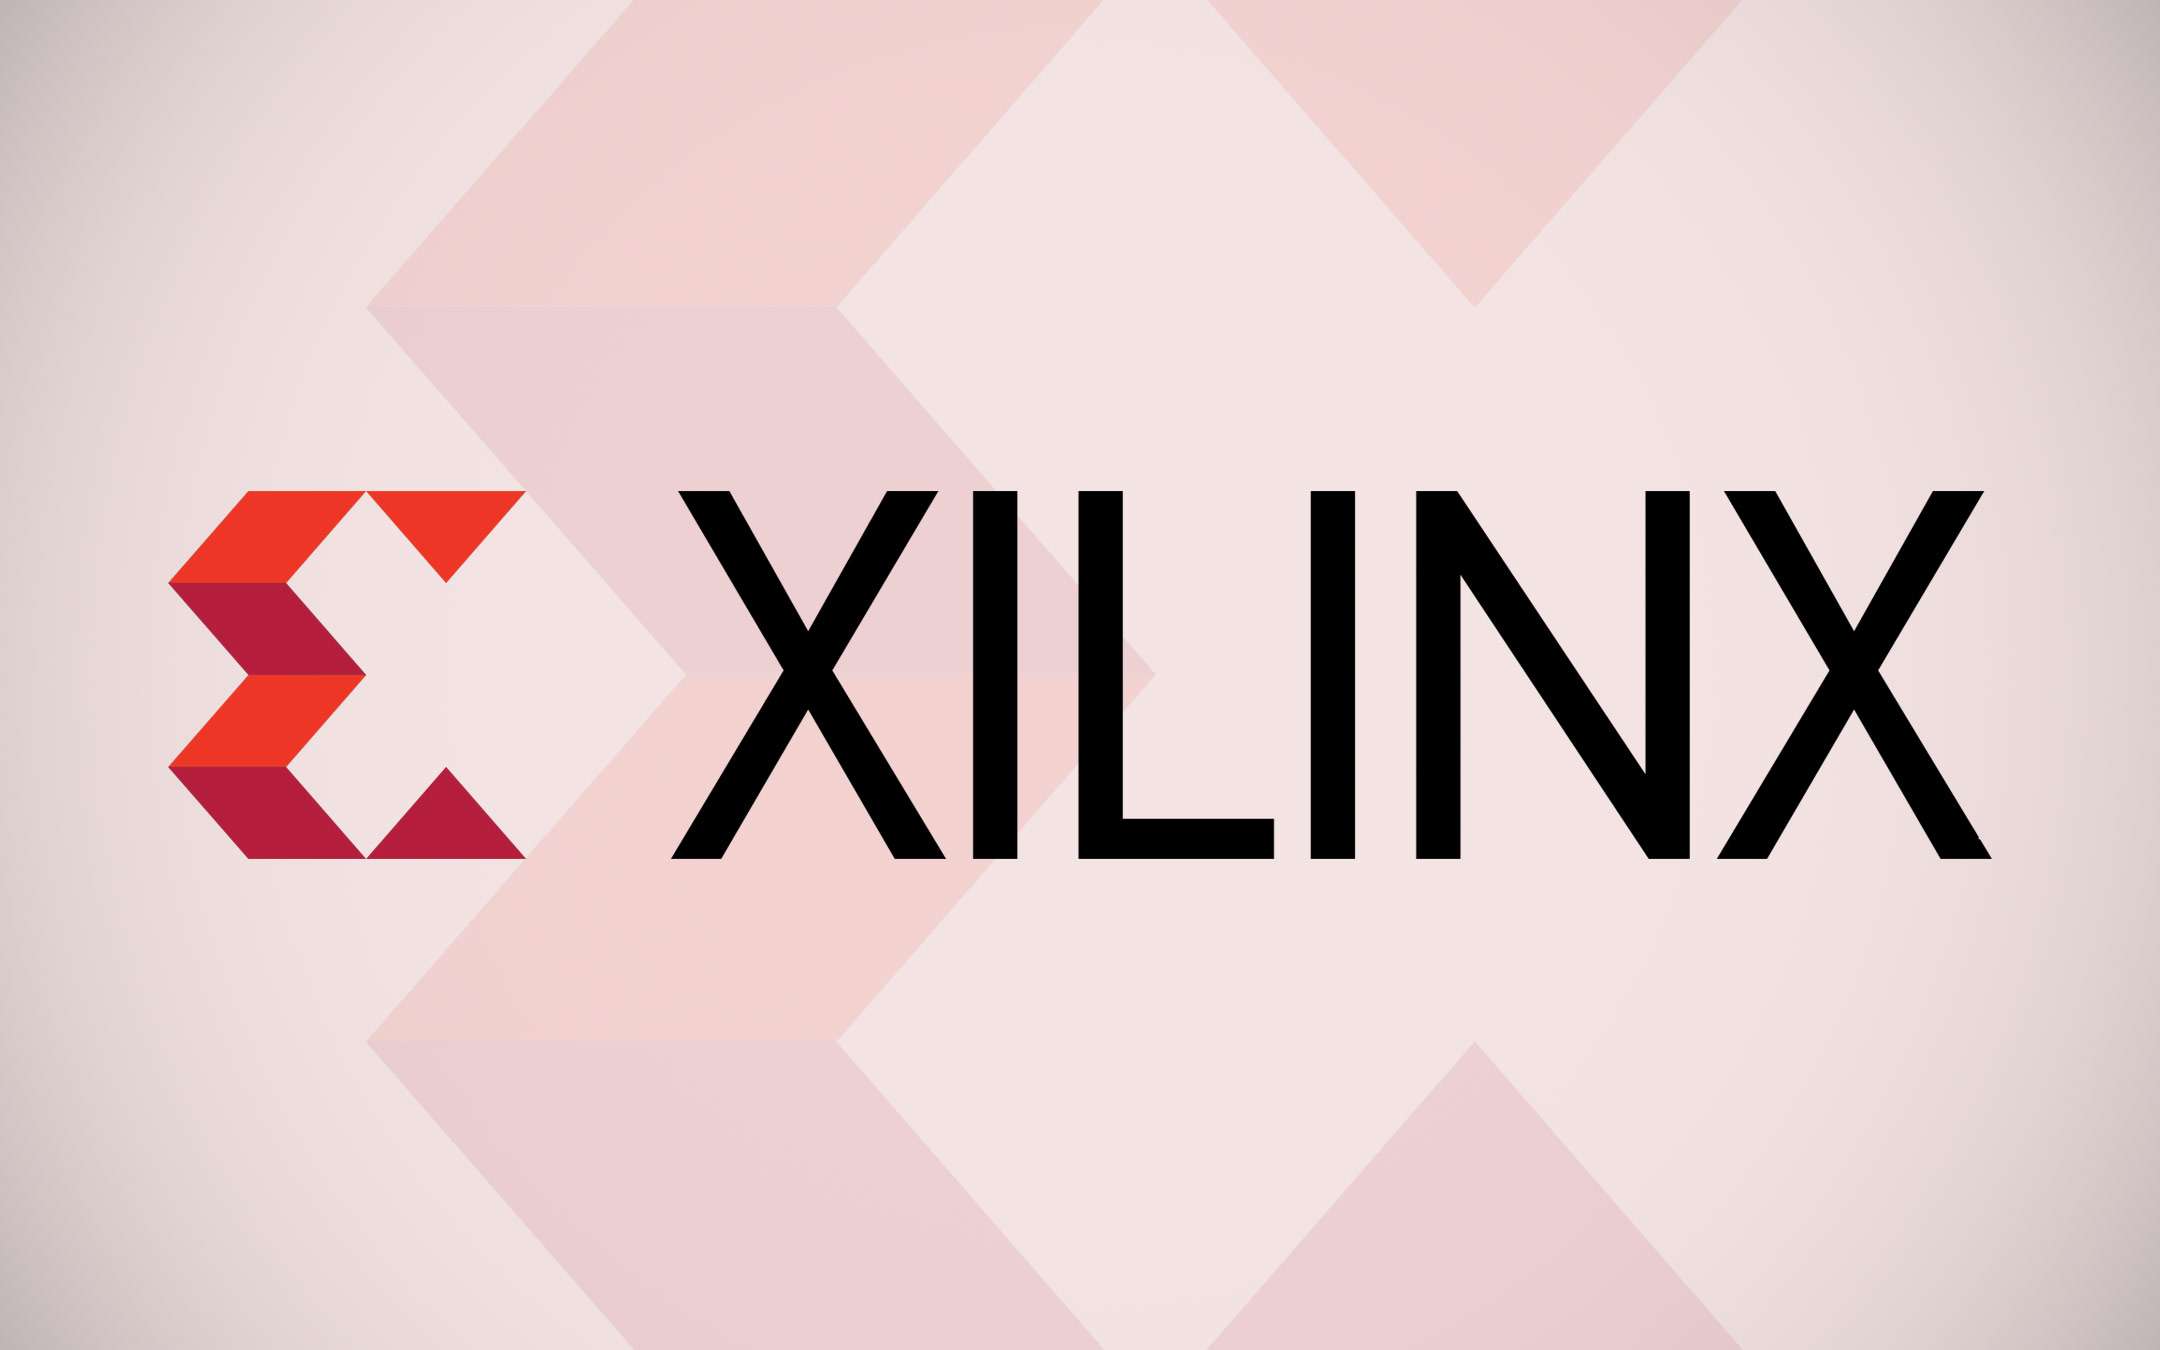 Xilinx is the acquisition of AMD for 35 billion